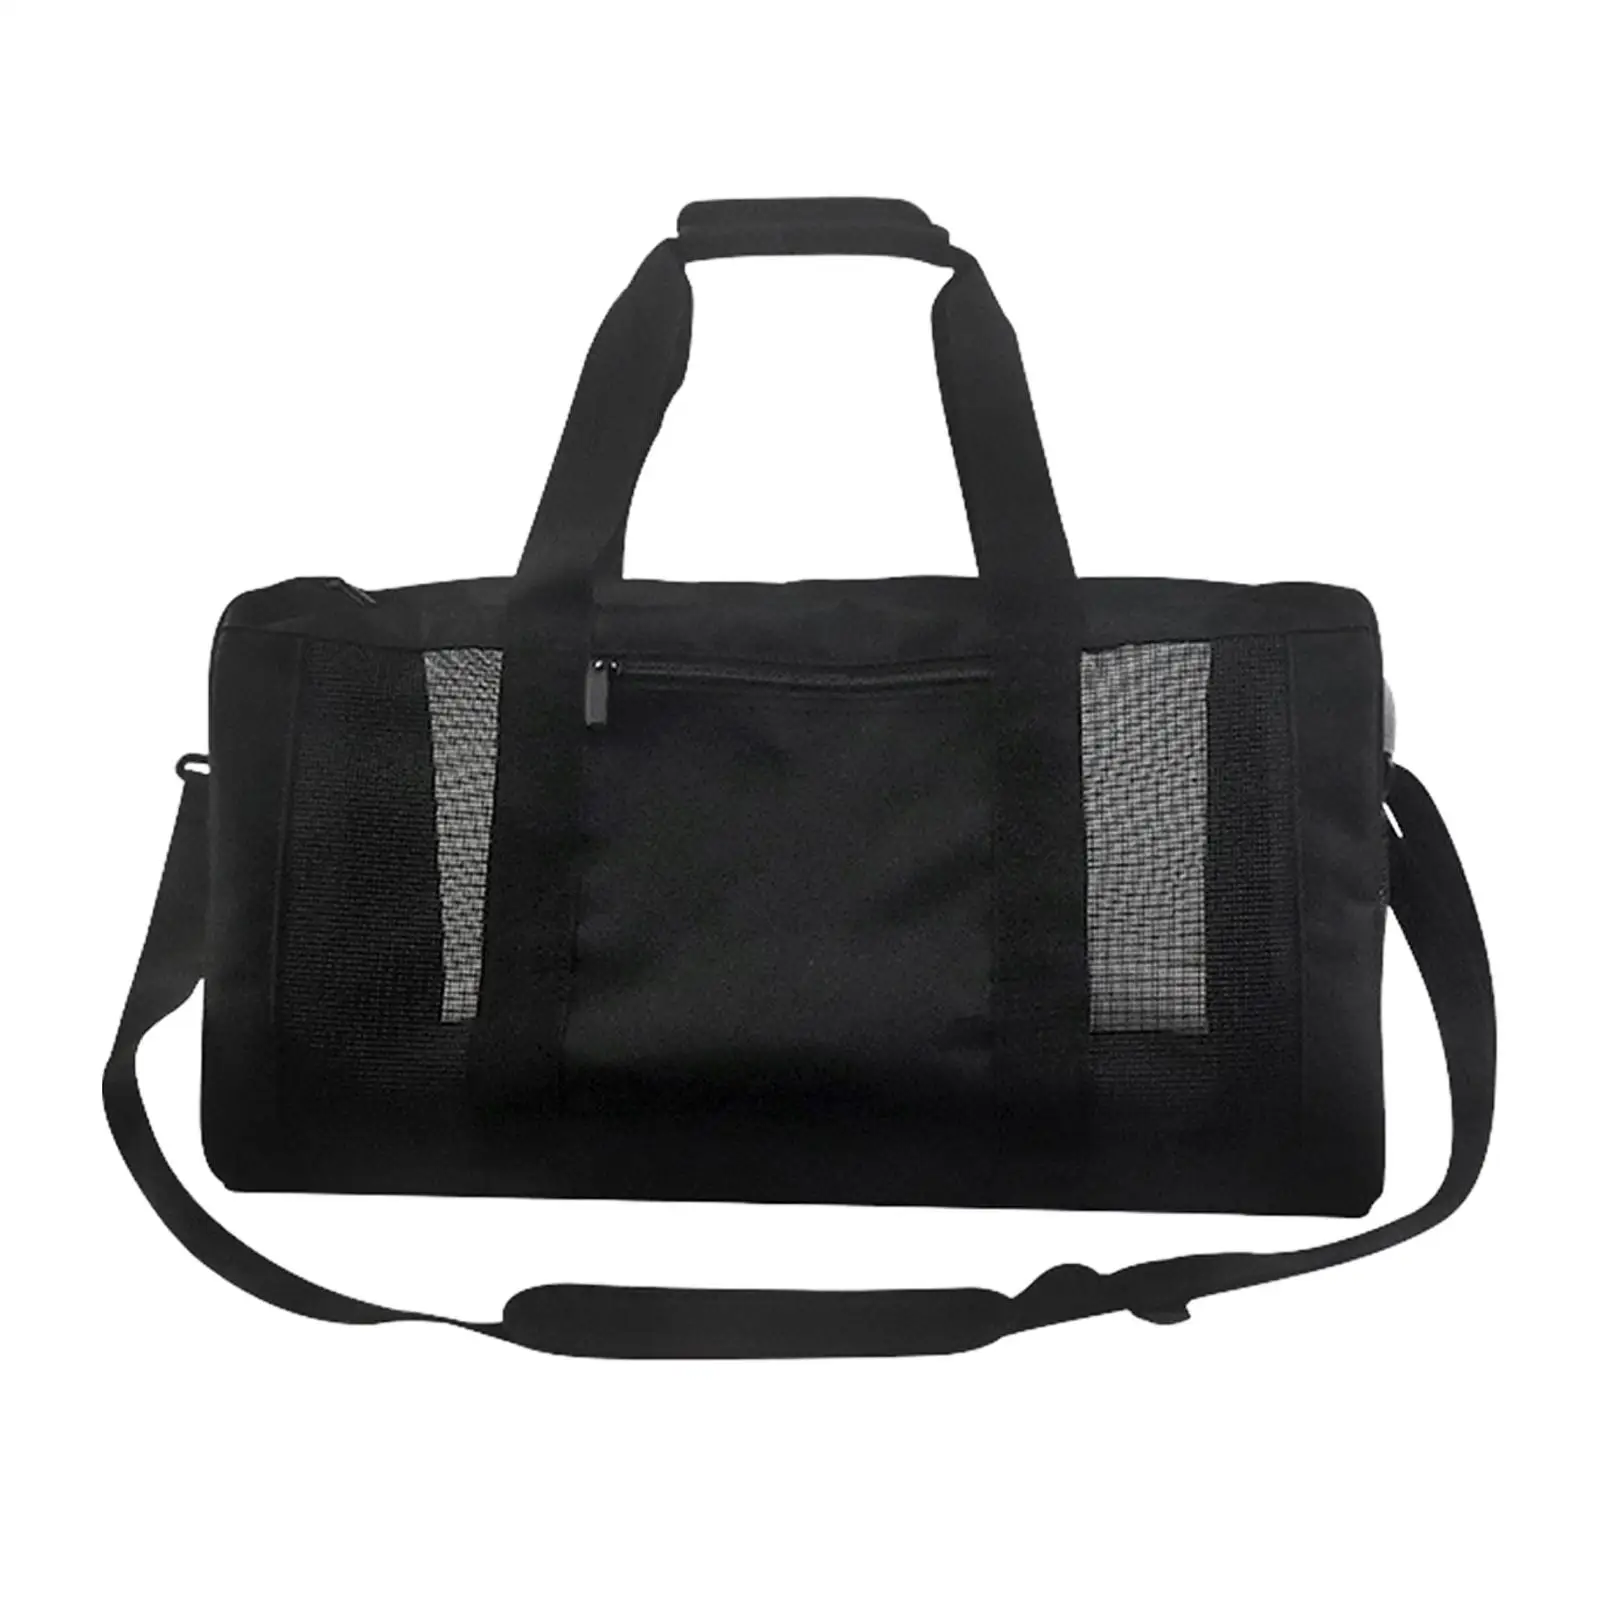 Mesh Gym Bag Cross Shoulder Travel Duffle Bag Overnight Weekender Bags Easy Dry Workout Gym Accessories Sports Bags Fitness Bag